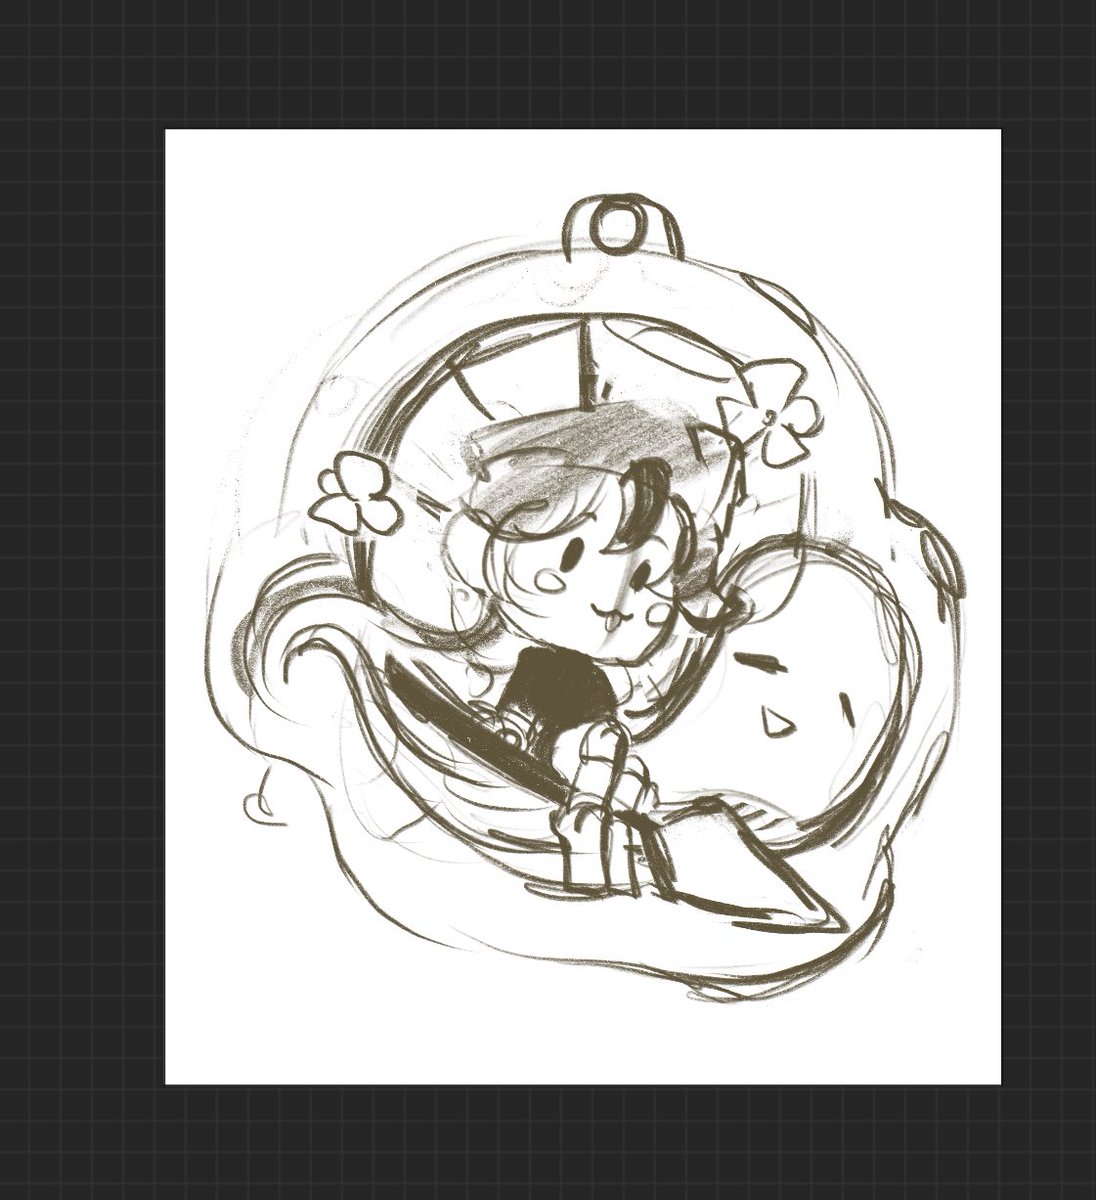 Thinking about keychains 